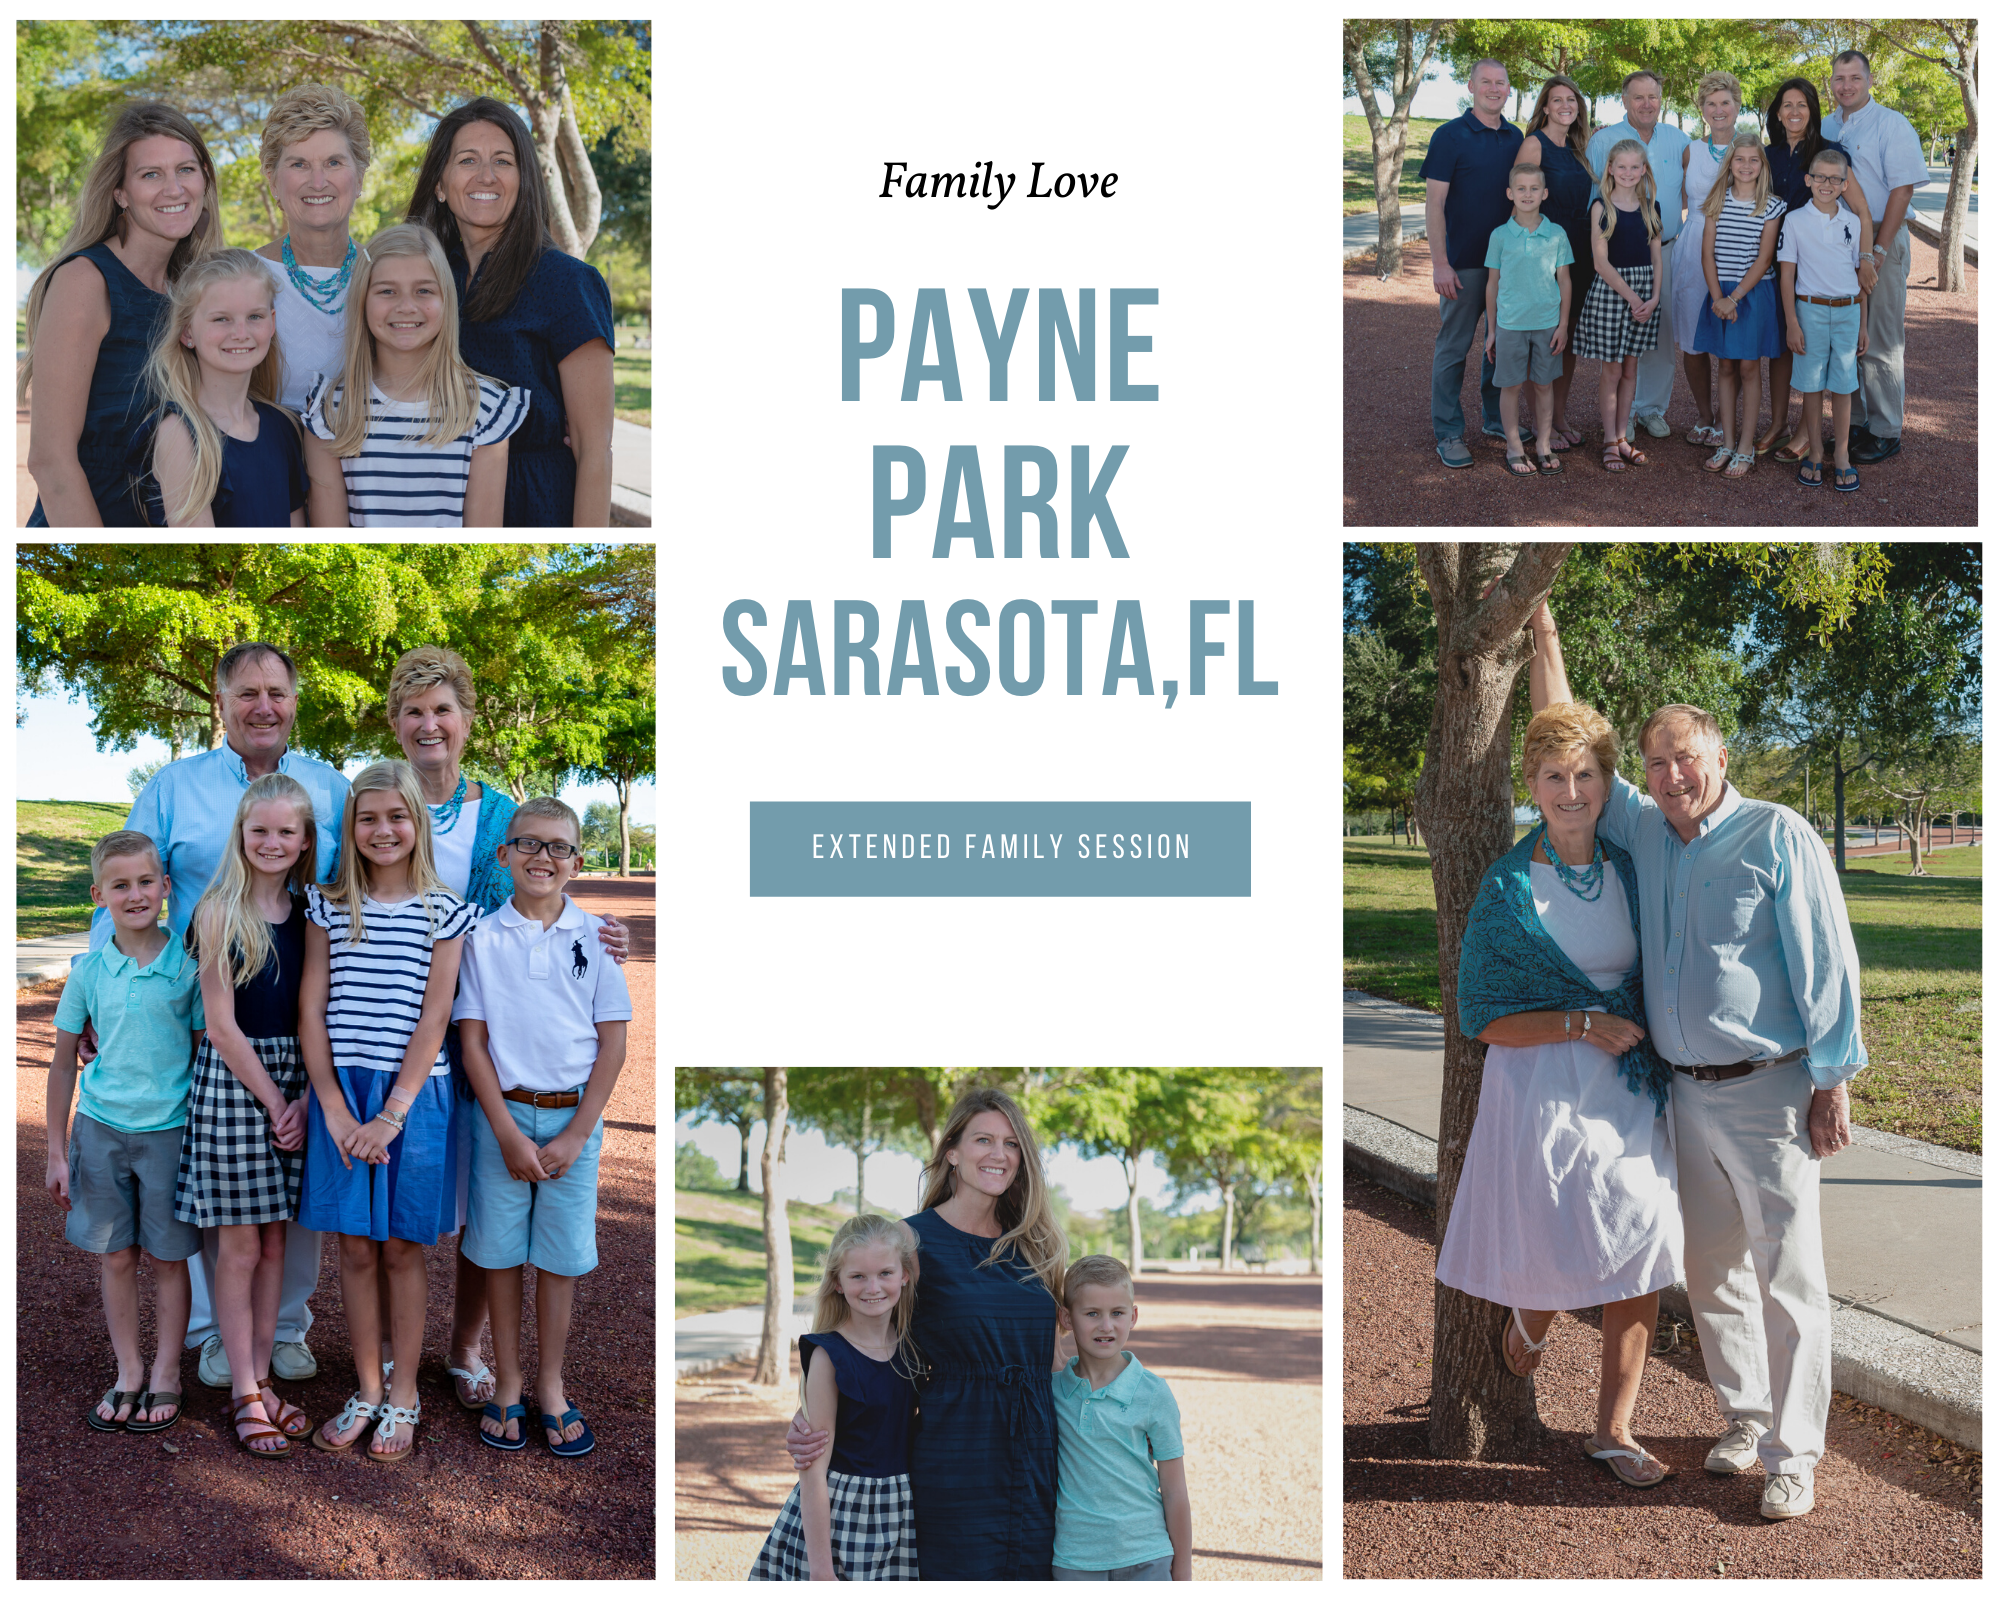 Family Photography Session at Payne Park